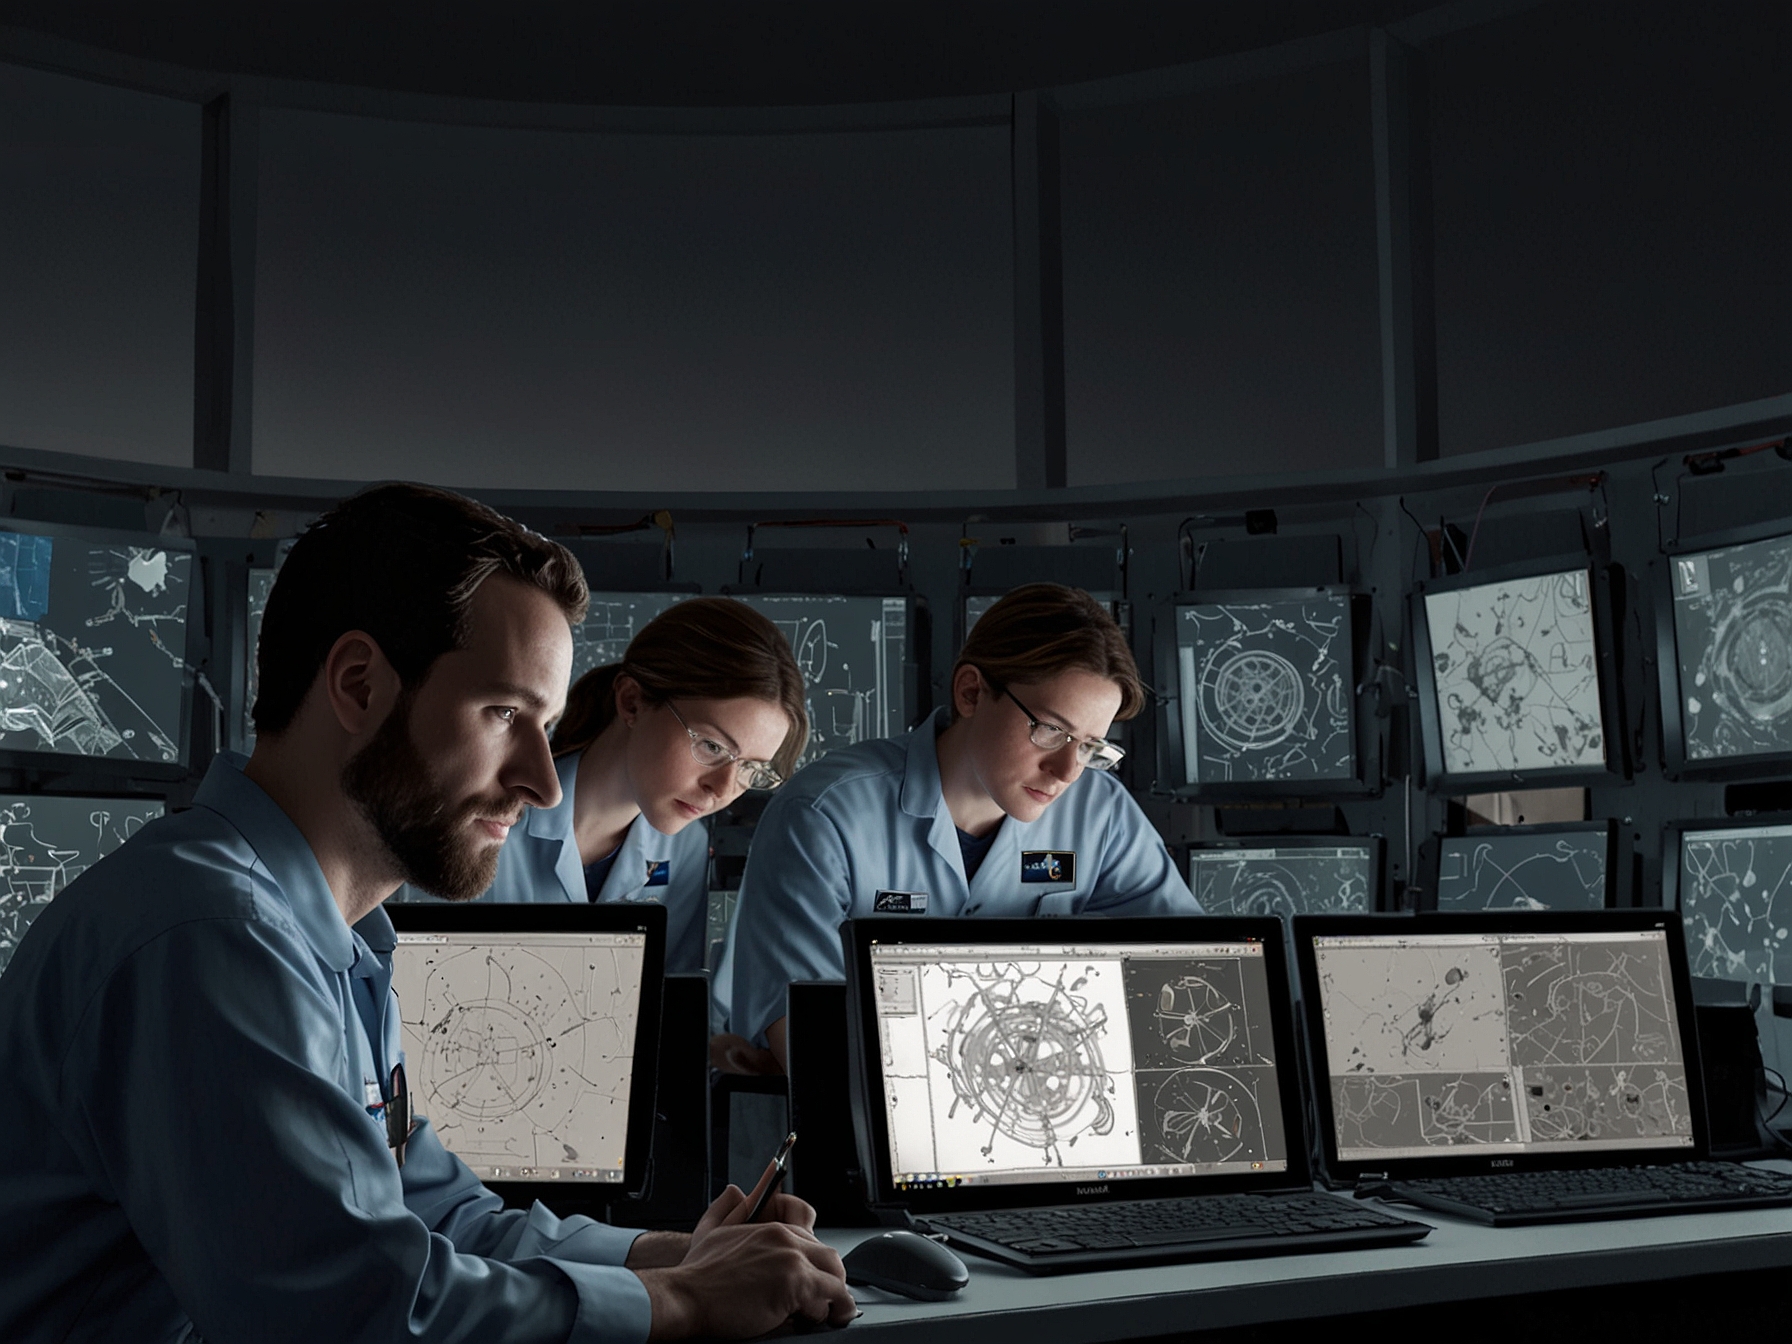 Engineers and scientists at NASA’s Jet Propulsion Laboratory are intensely focused on computer screens as they work to diagnose and resolve the issues plaguing the SHERLOC instrument on the Perseverance rover.